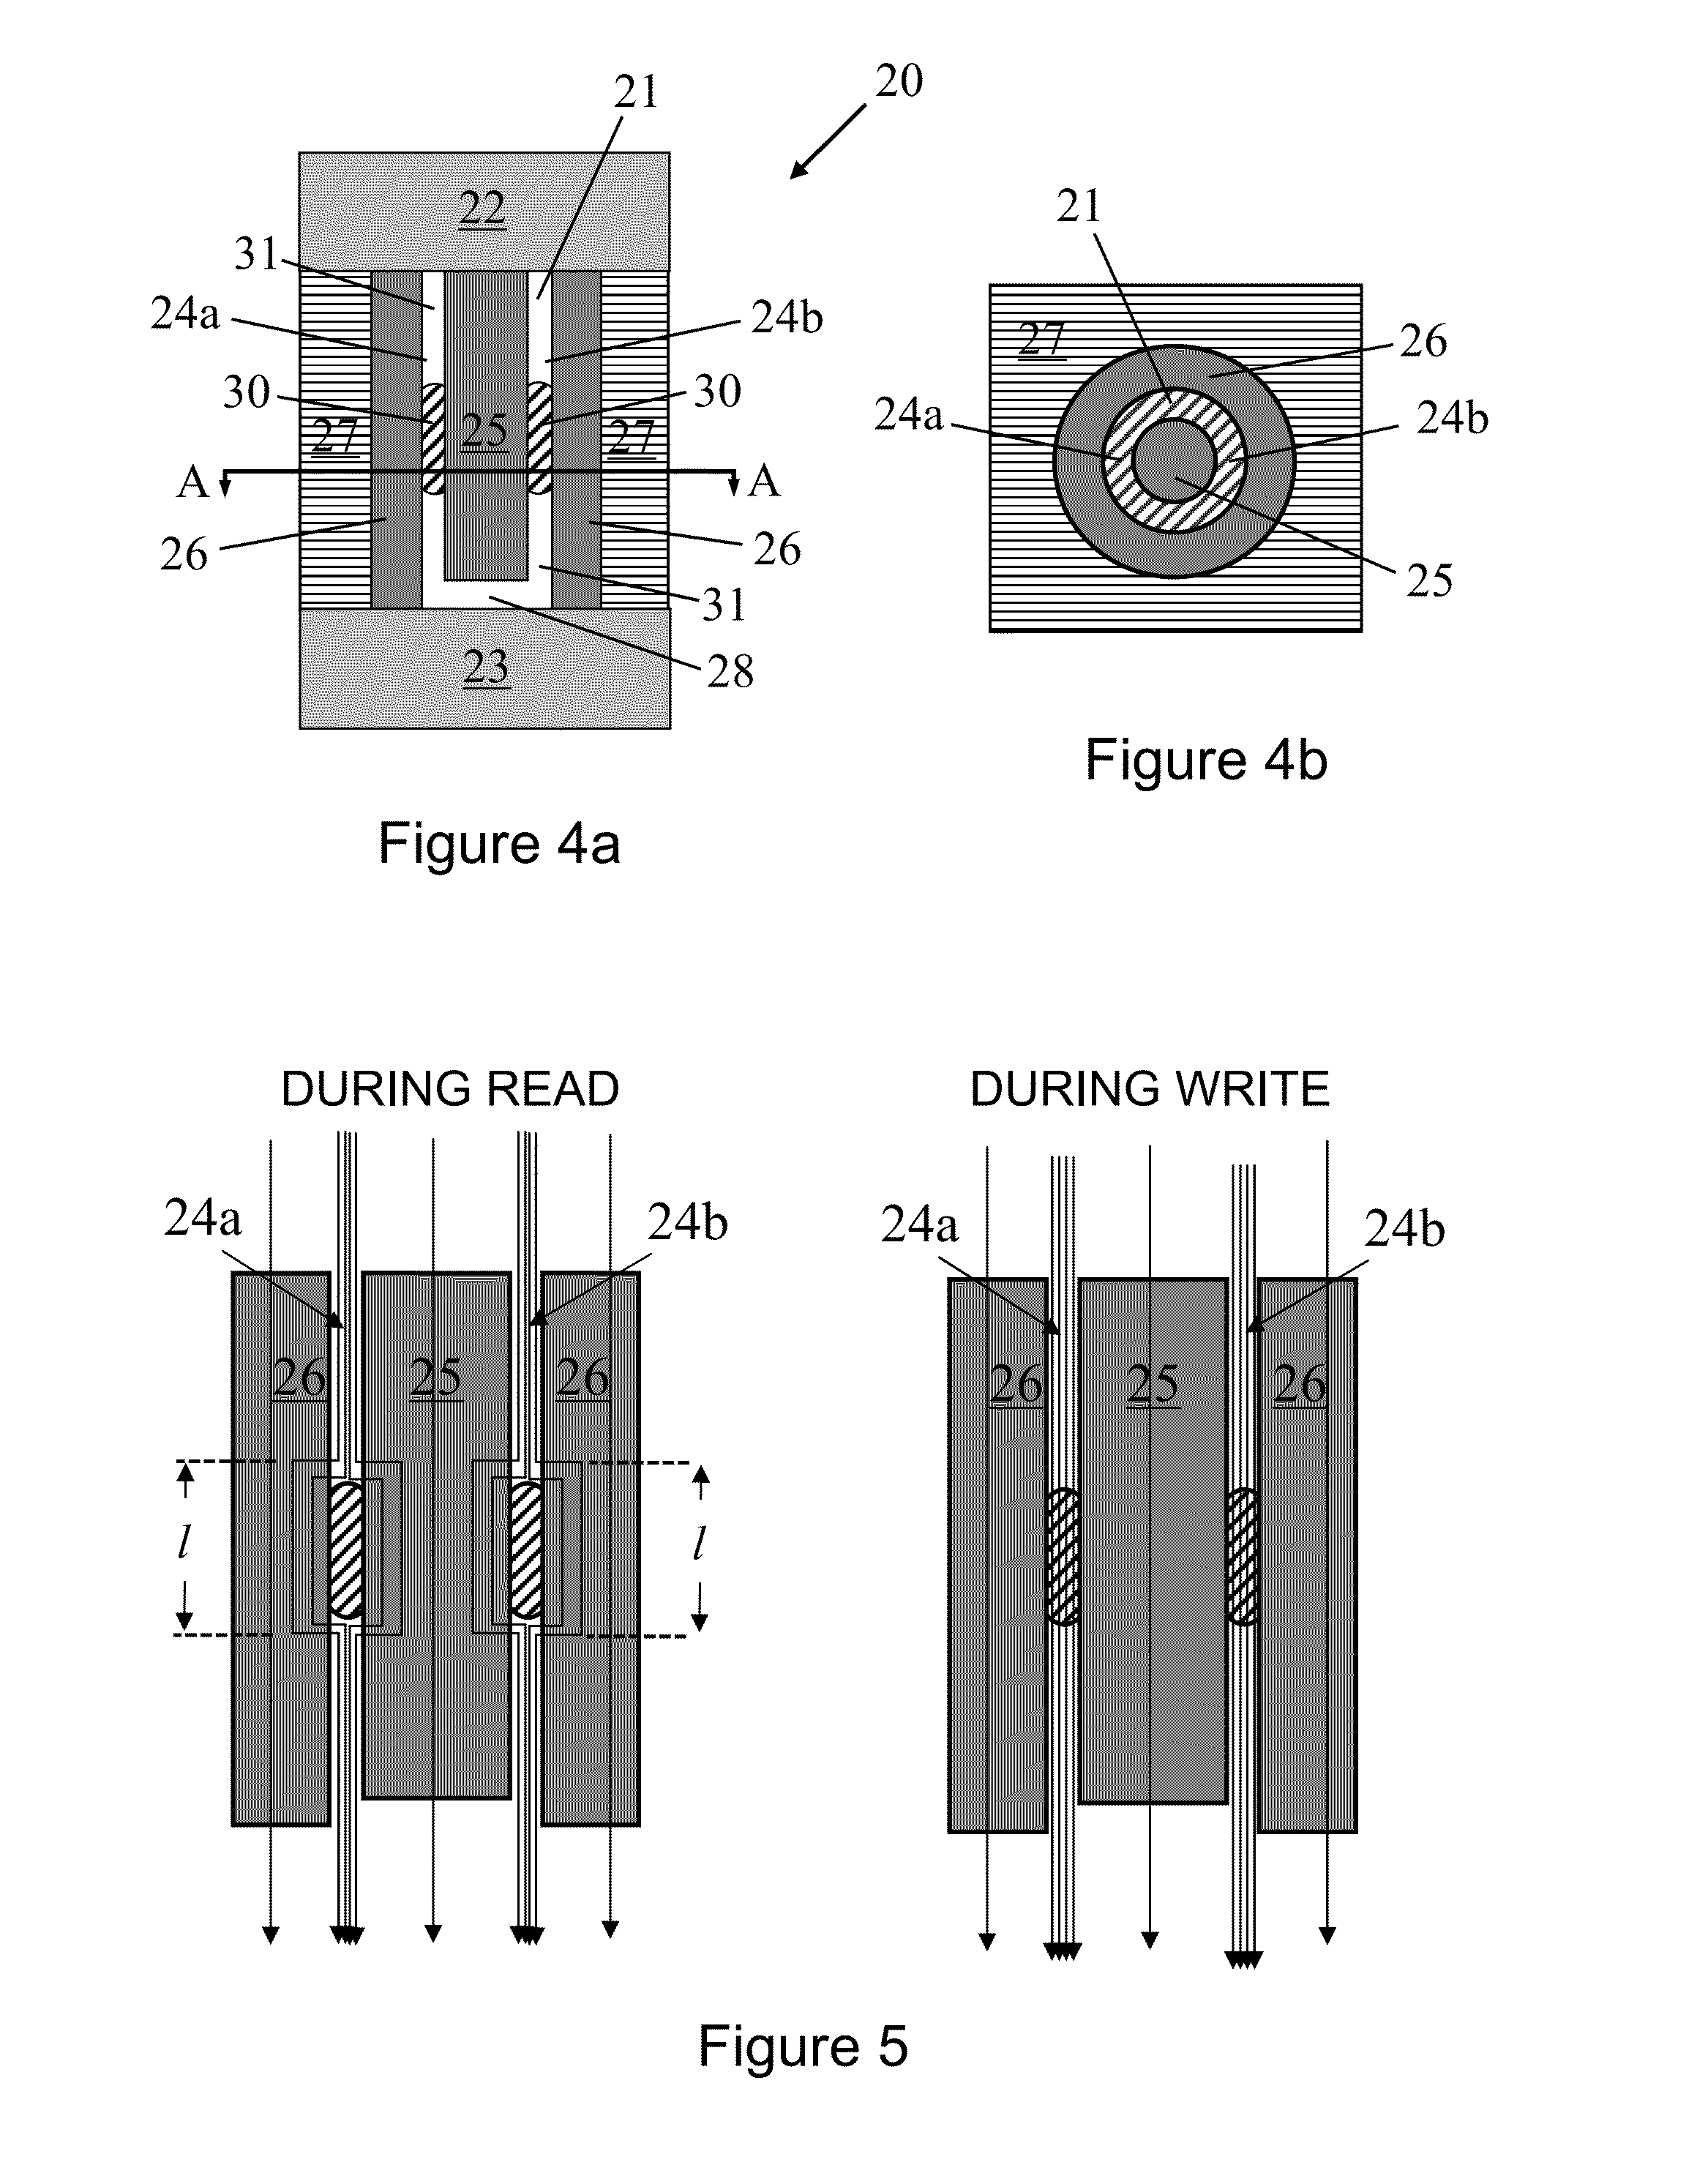 Phase-change memory cells